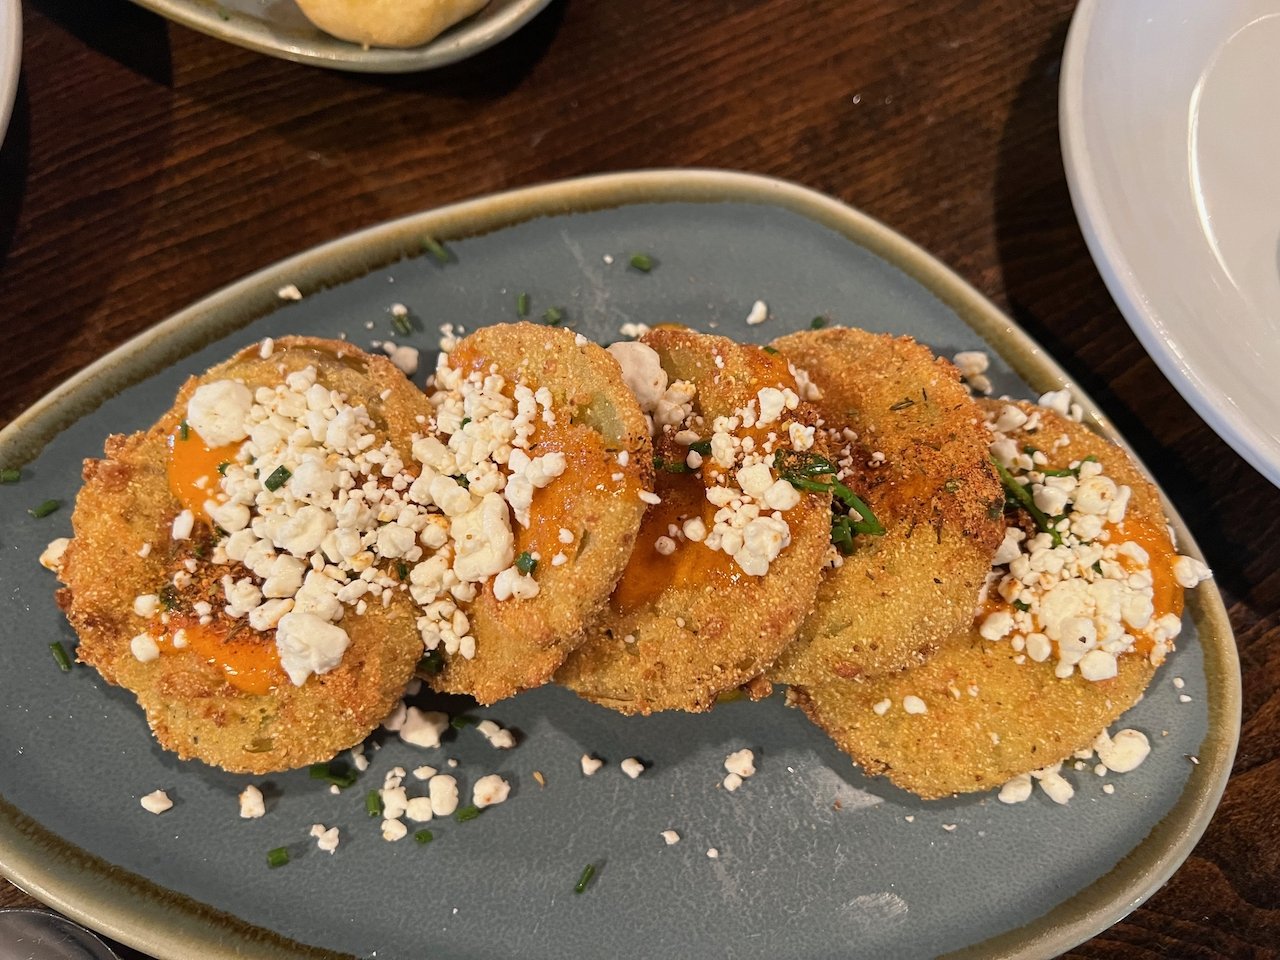 Lucille's - fried green tomatoes